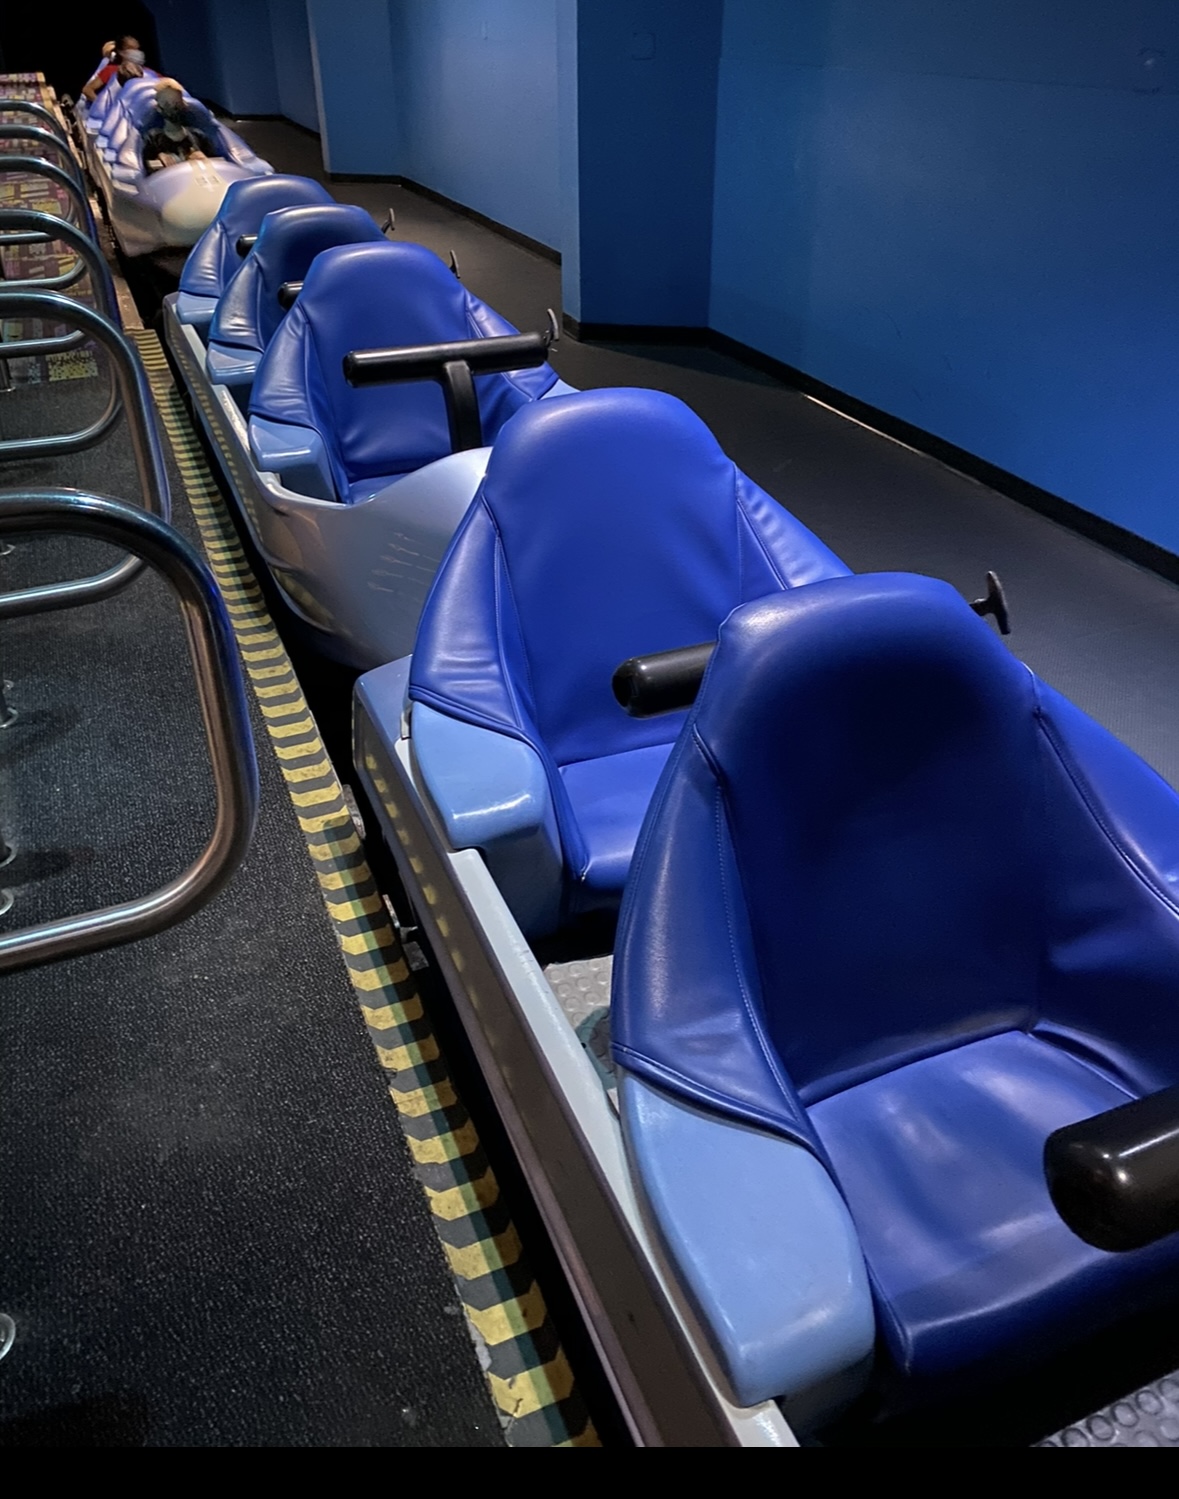 Ride vehicles at Space Mountain in Magic Kingdom